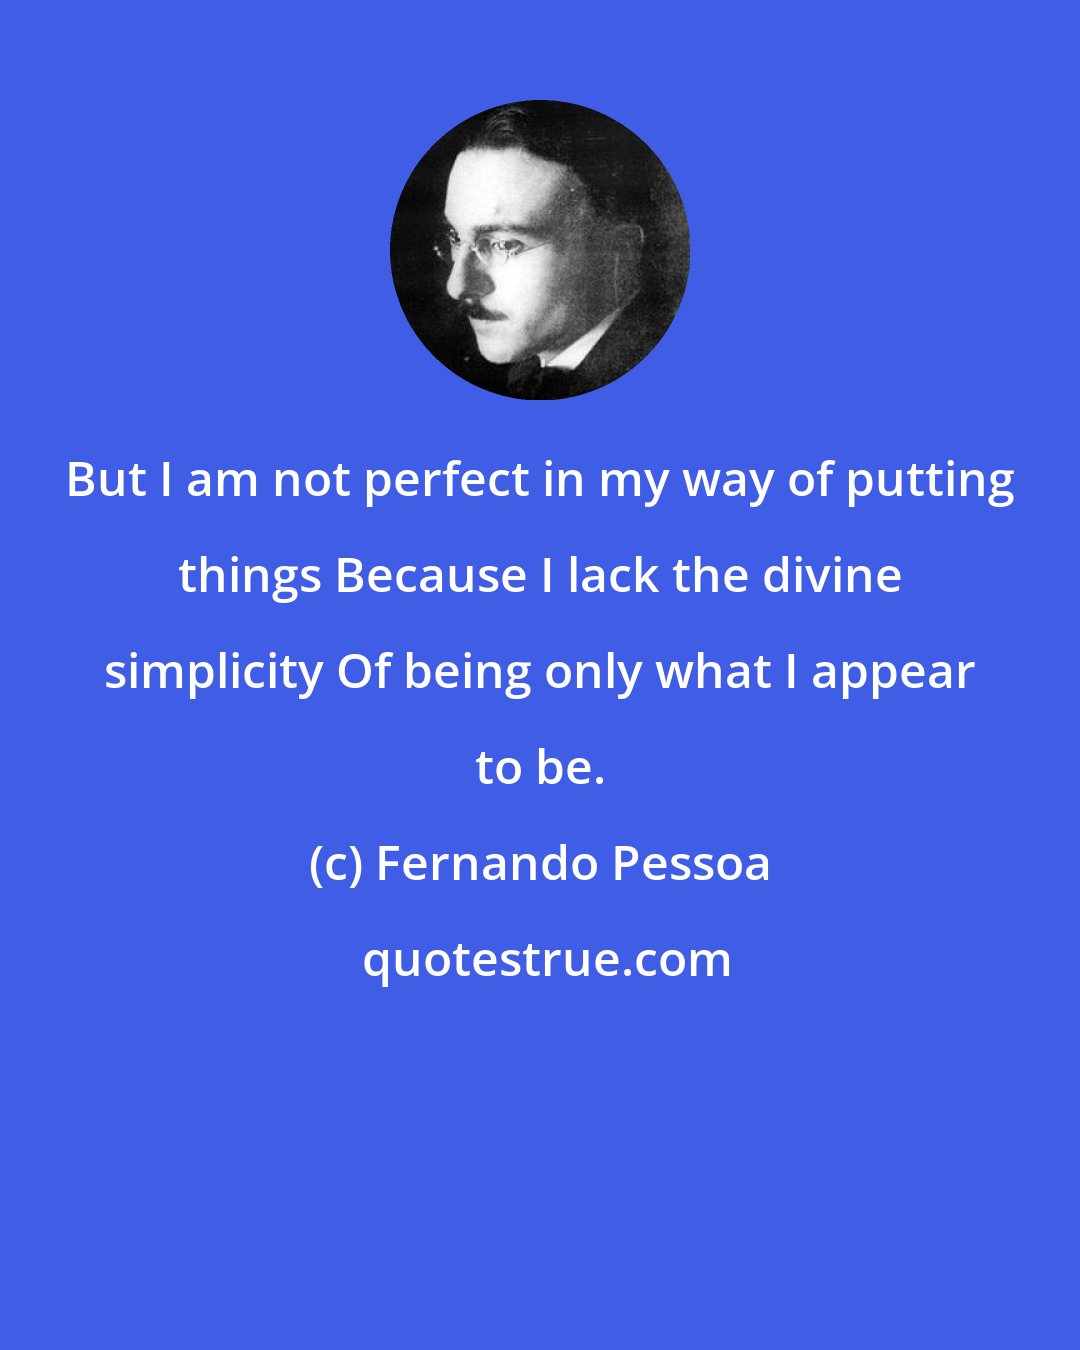 Fernando Pessoa: But I am not perfect in my way of putting things Because I lack the divine simplicity Of being only what I appear to be.